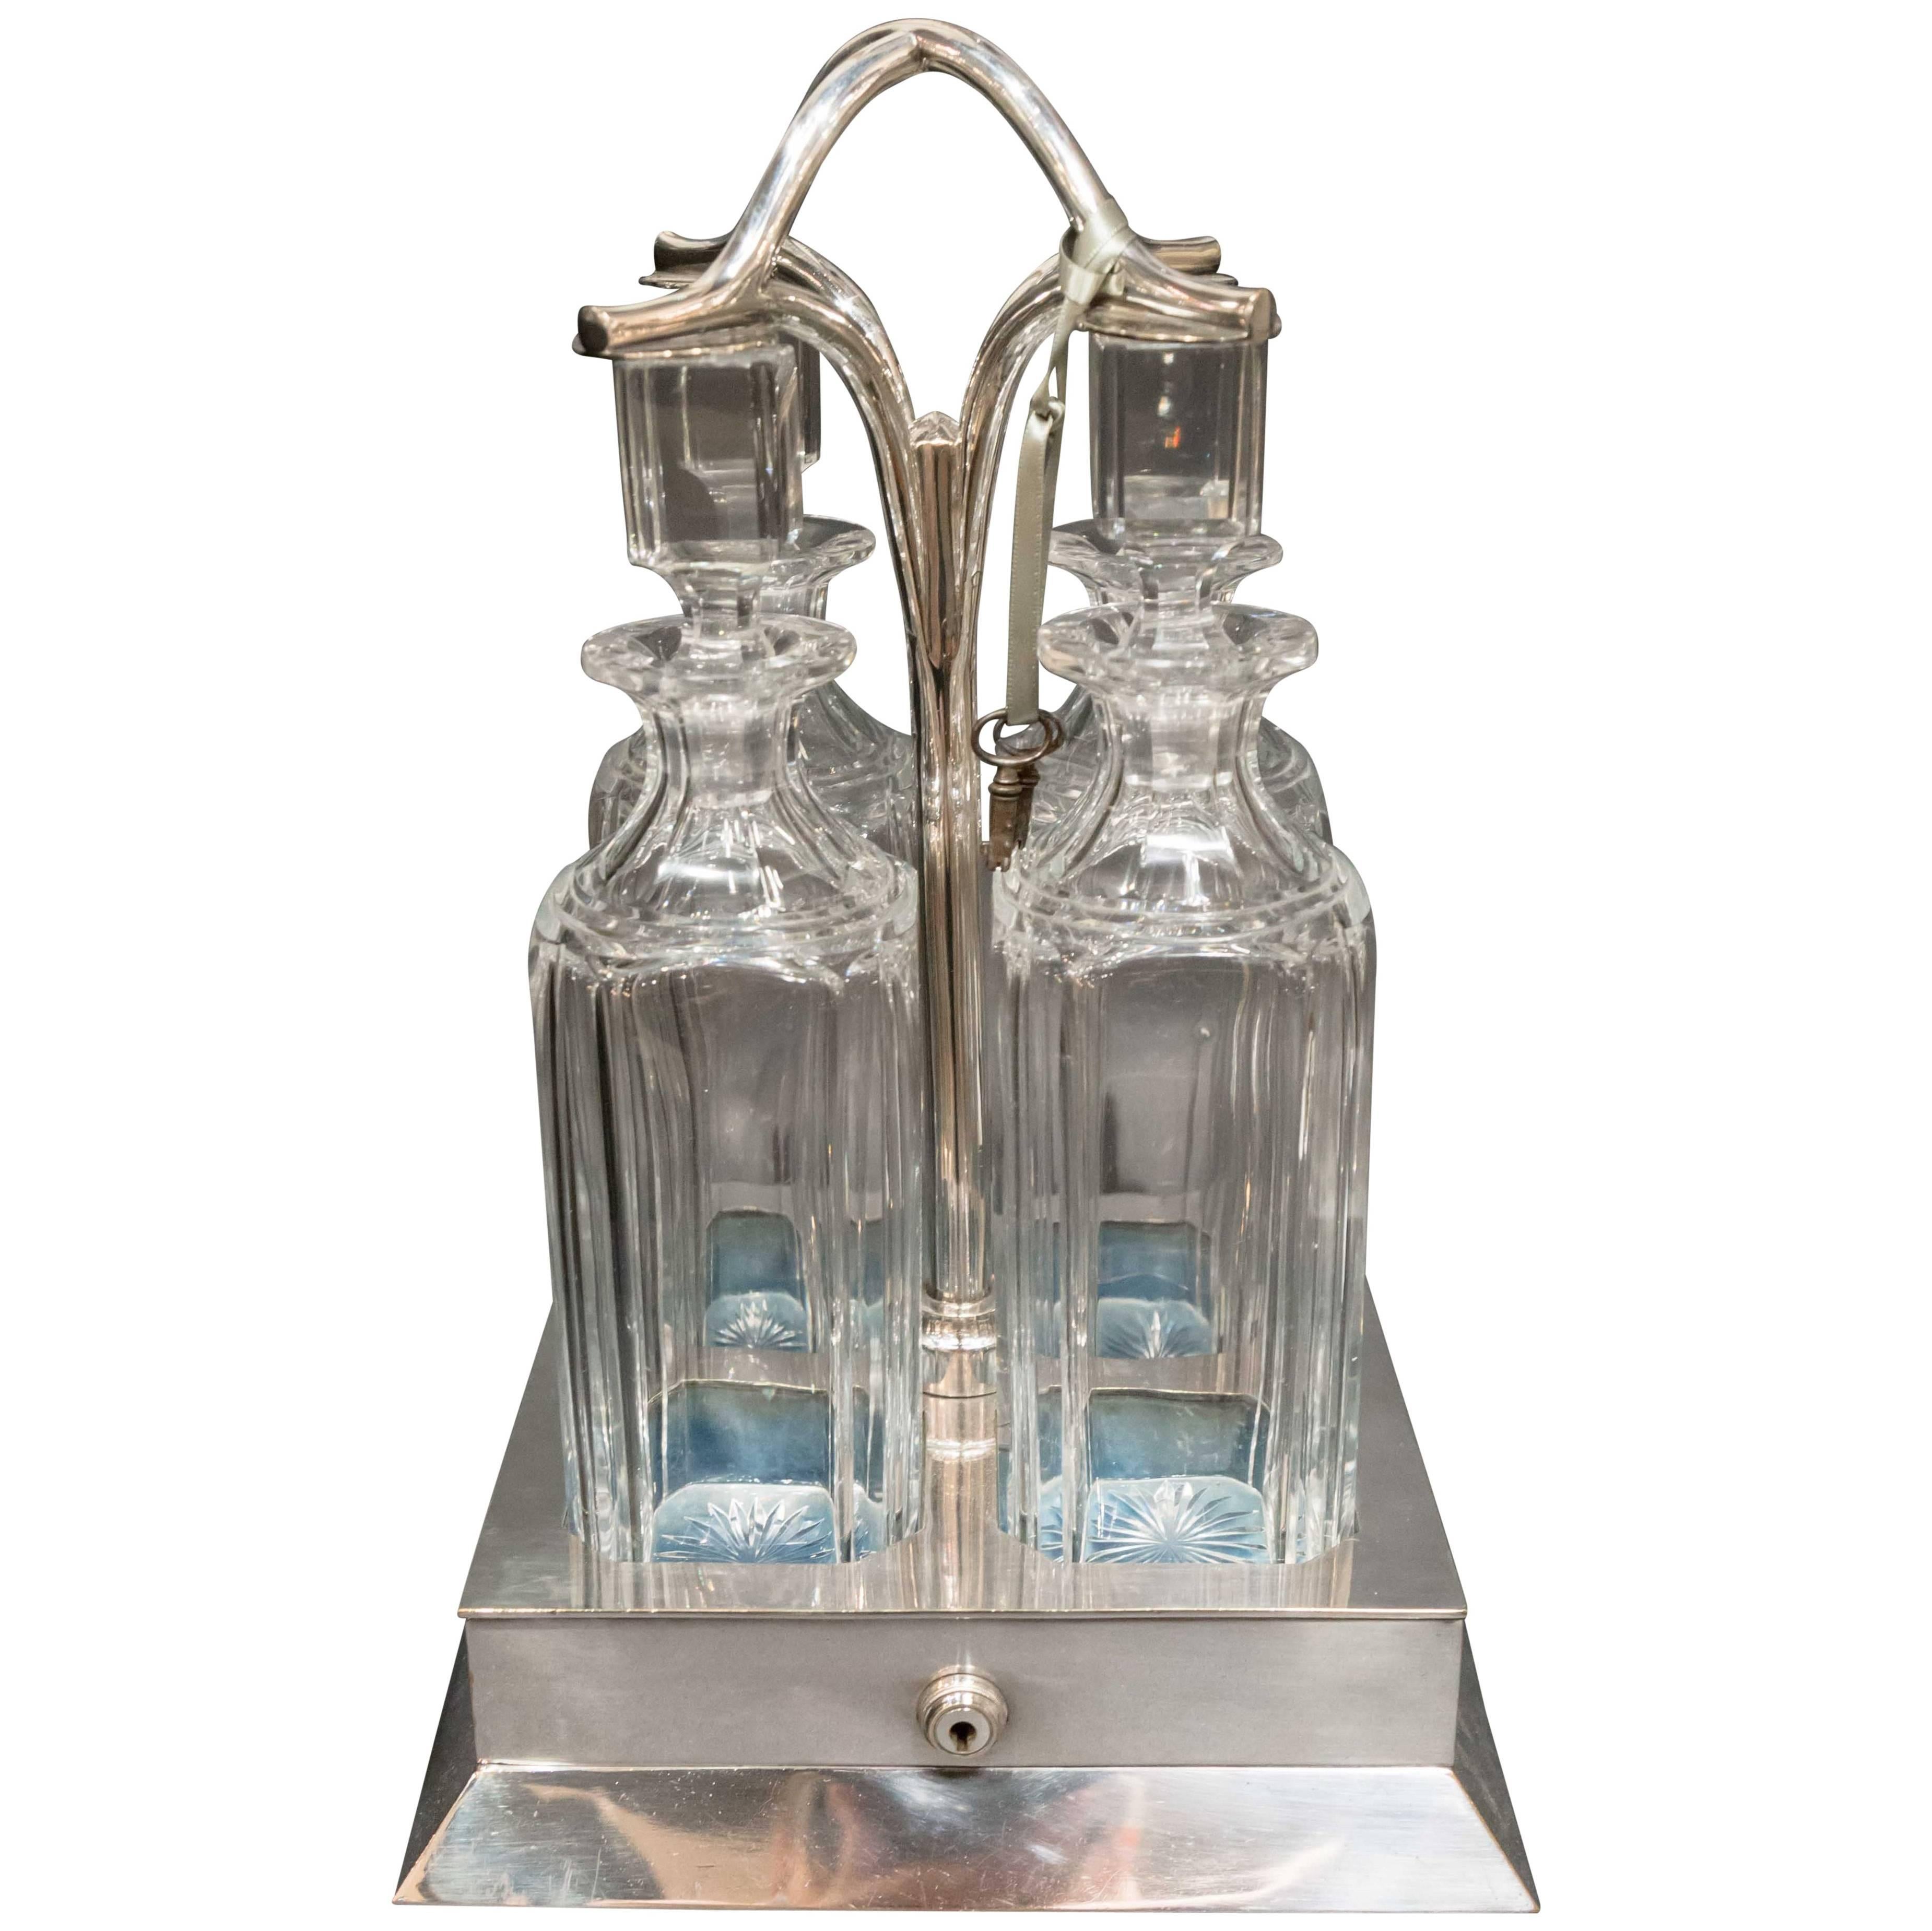 Four Bottle Locking Tanalus with Silver Plate, circa 1890